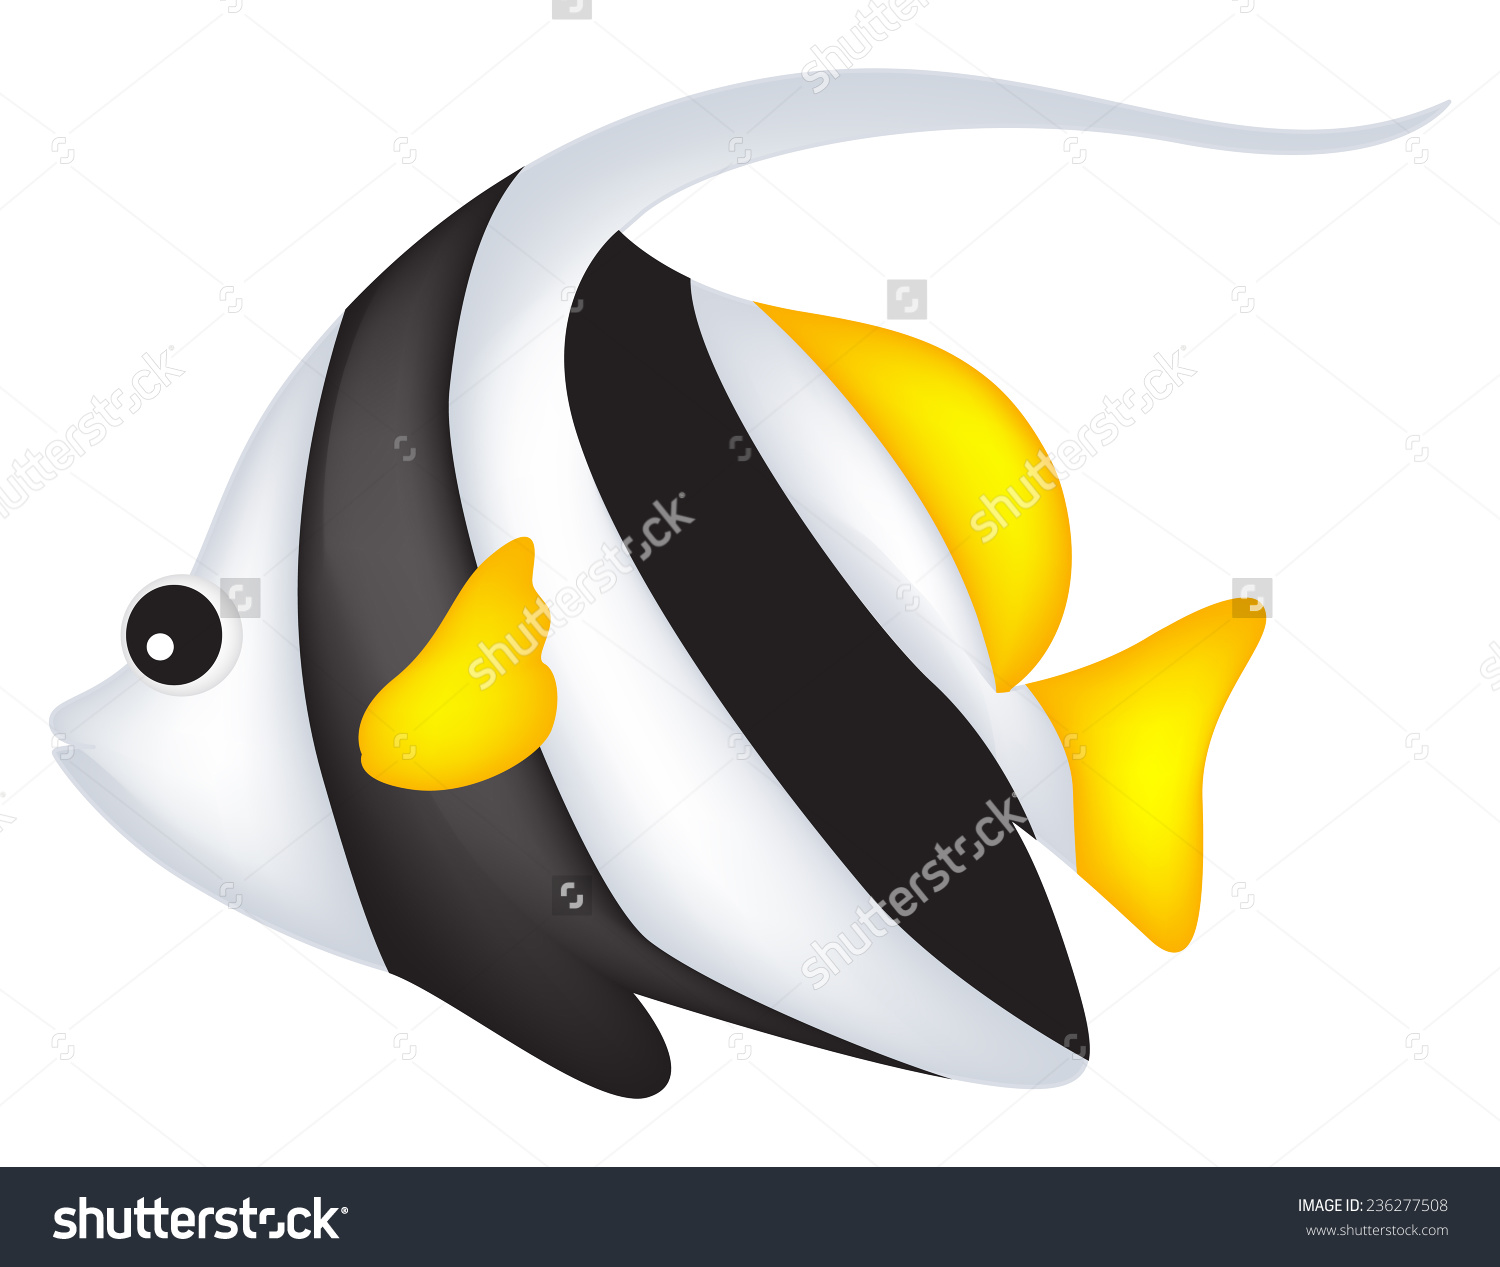 Save to a lightbox - Angelfish Clipart